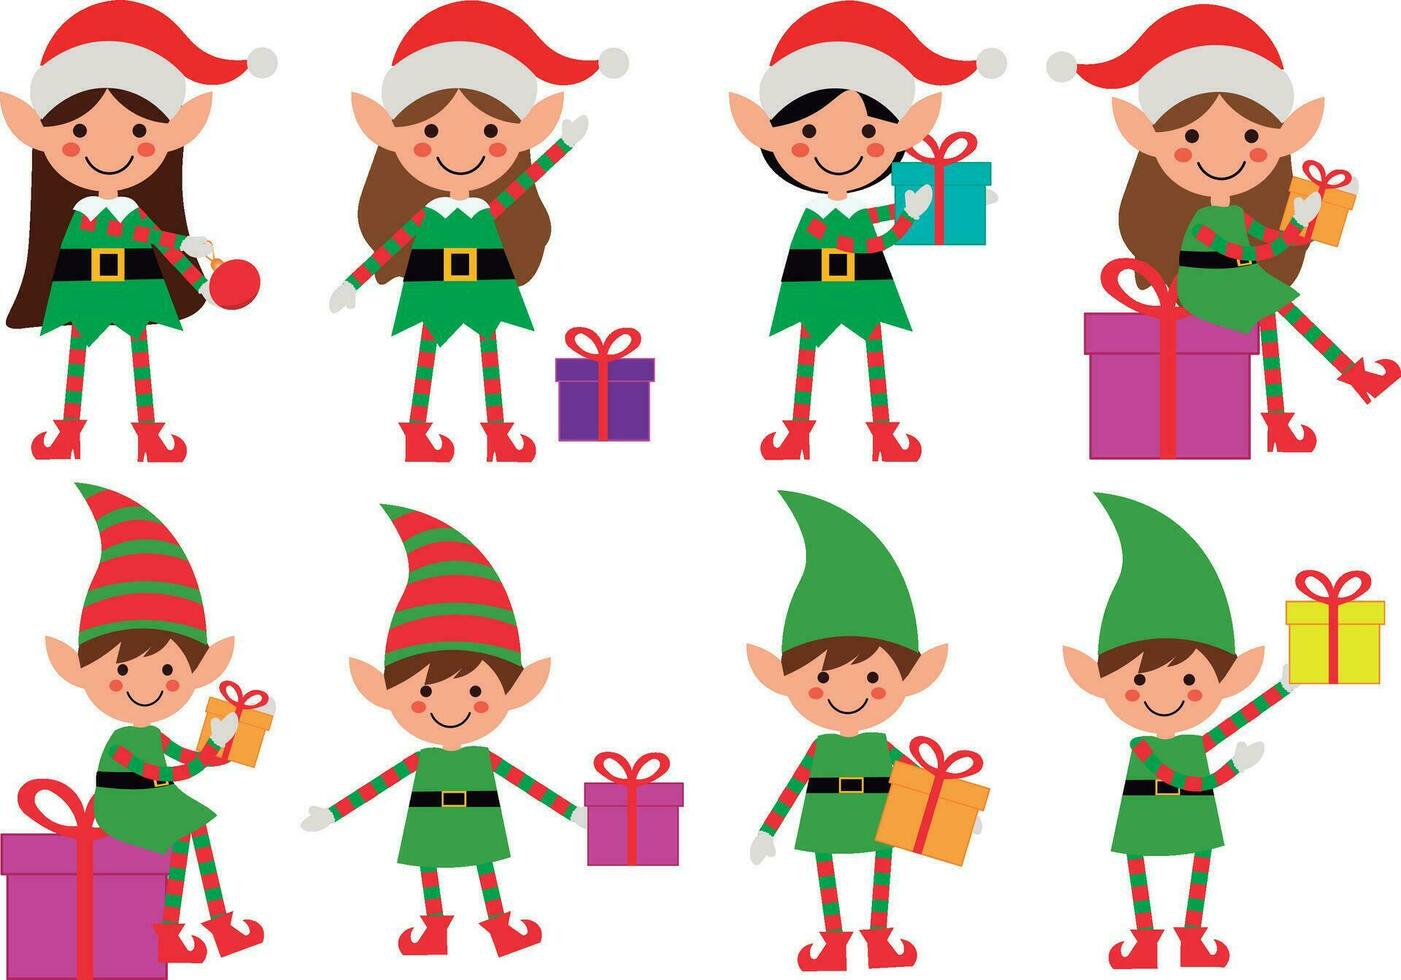 Adorable Santa's elves in green and red outfits showcasing various poses and holding Christmas presents and items. Perfect for festive holiday designs and decorations vector